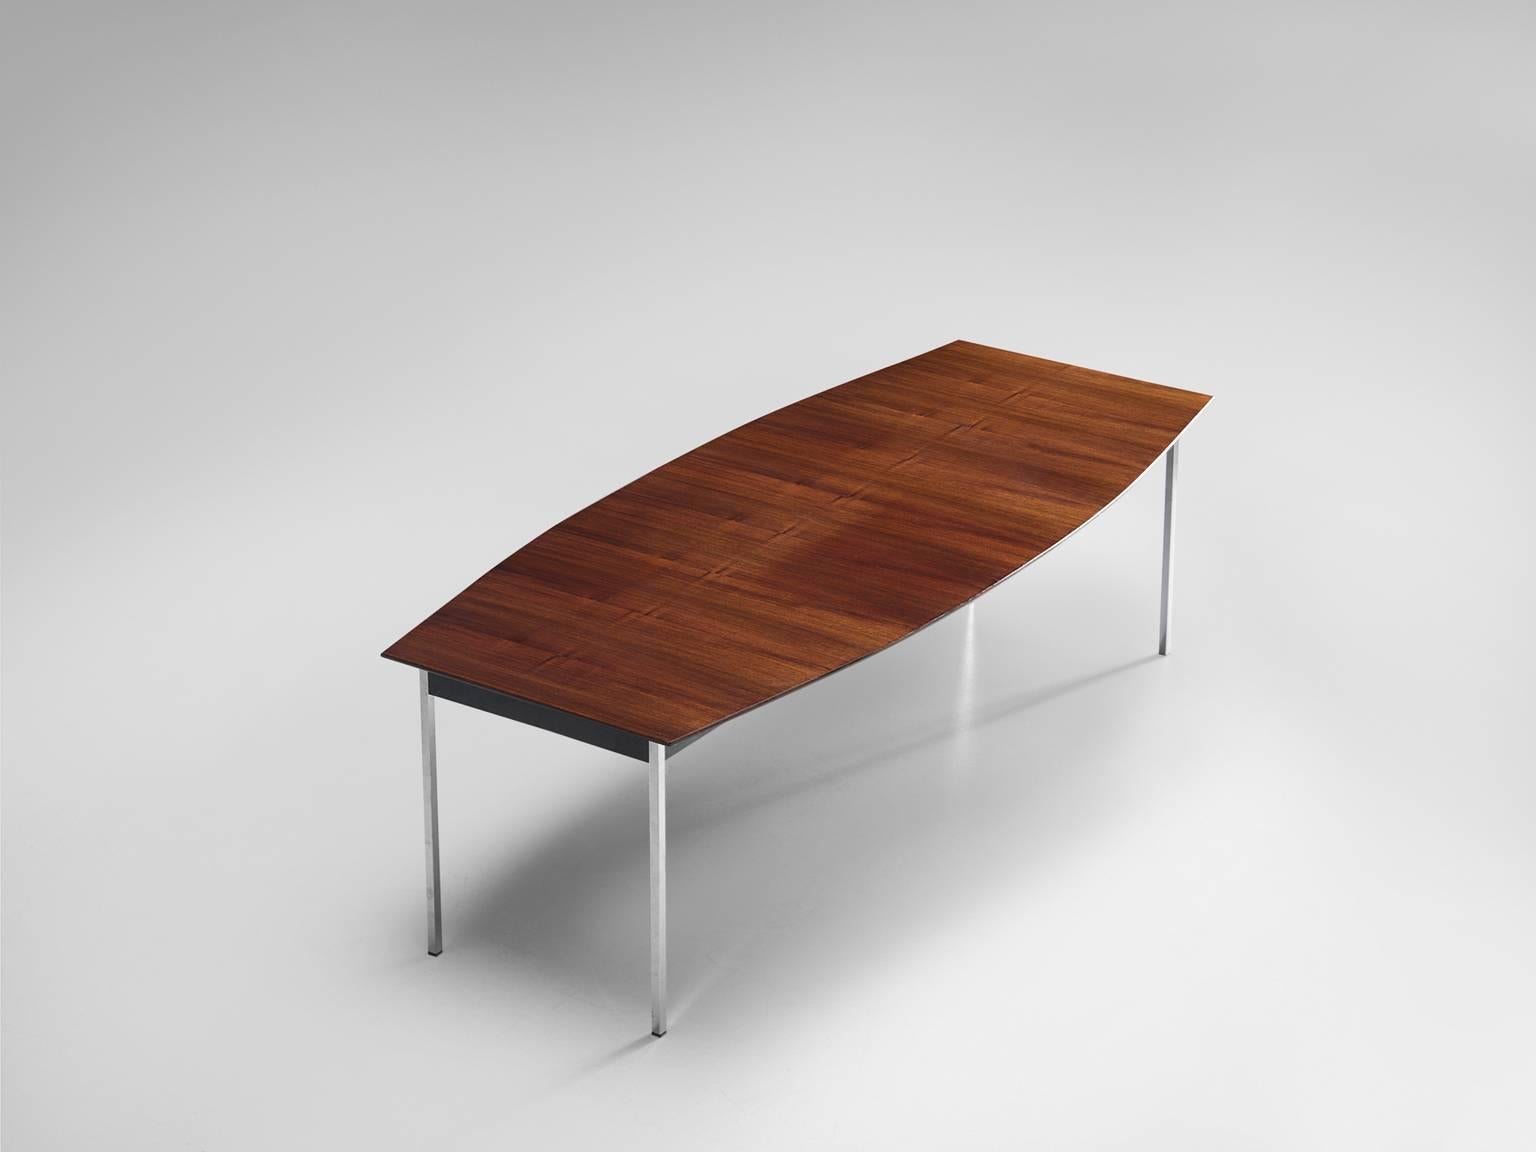 Dining table, in rosewood, metal, by Alfred Hendrickx for Belform, Belgium, 1960s.

Boat shaped rosewood dining room table featuring a beautiful grain in the rosewood veneer on an chromed frame. This table is designed by the Belgian designer